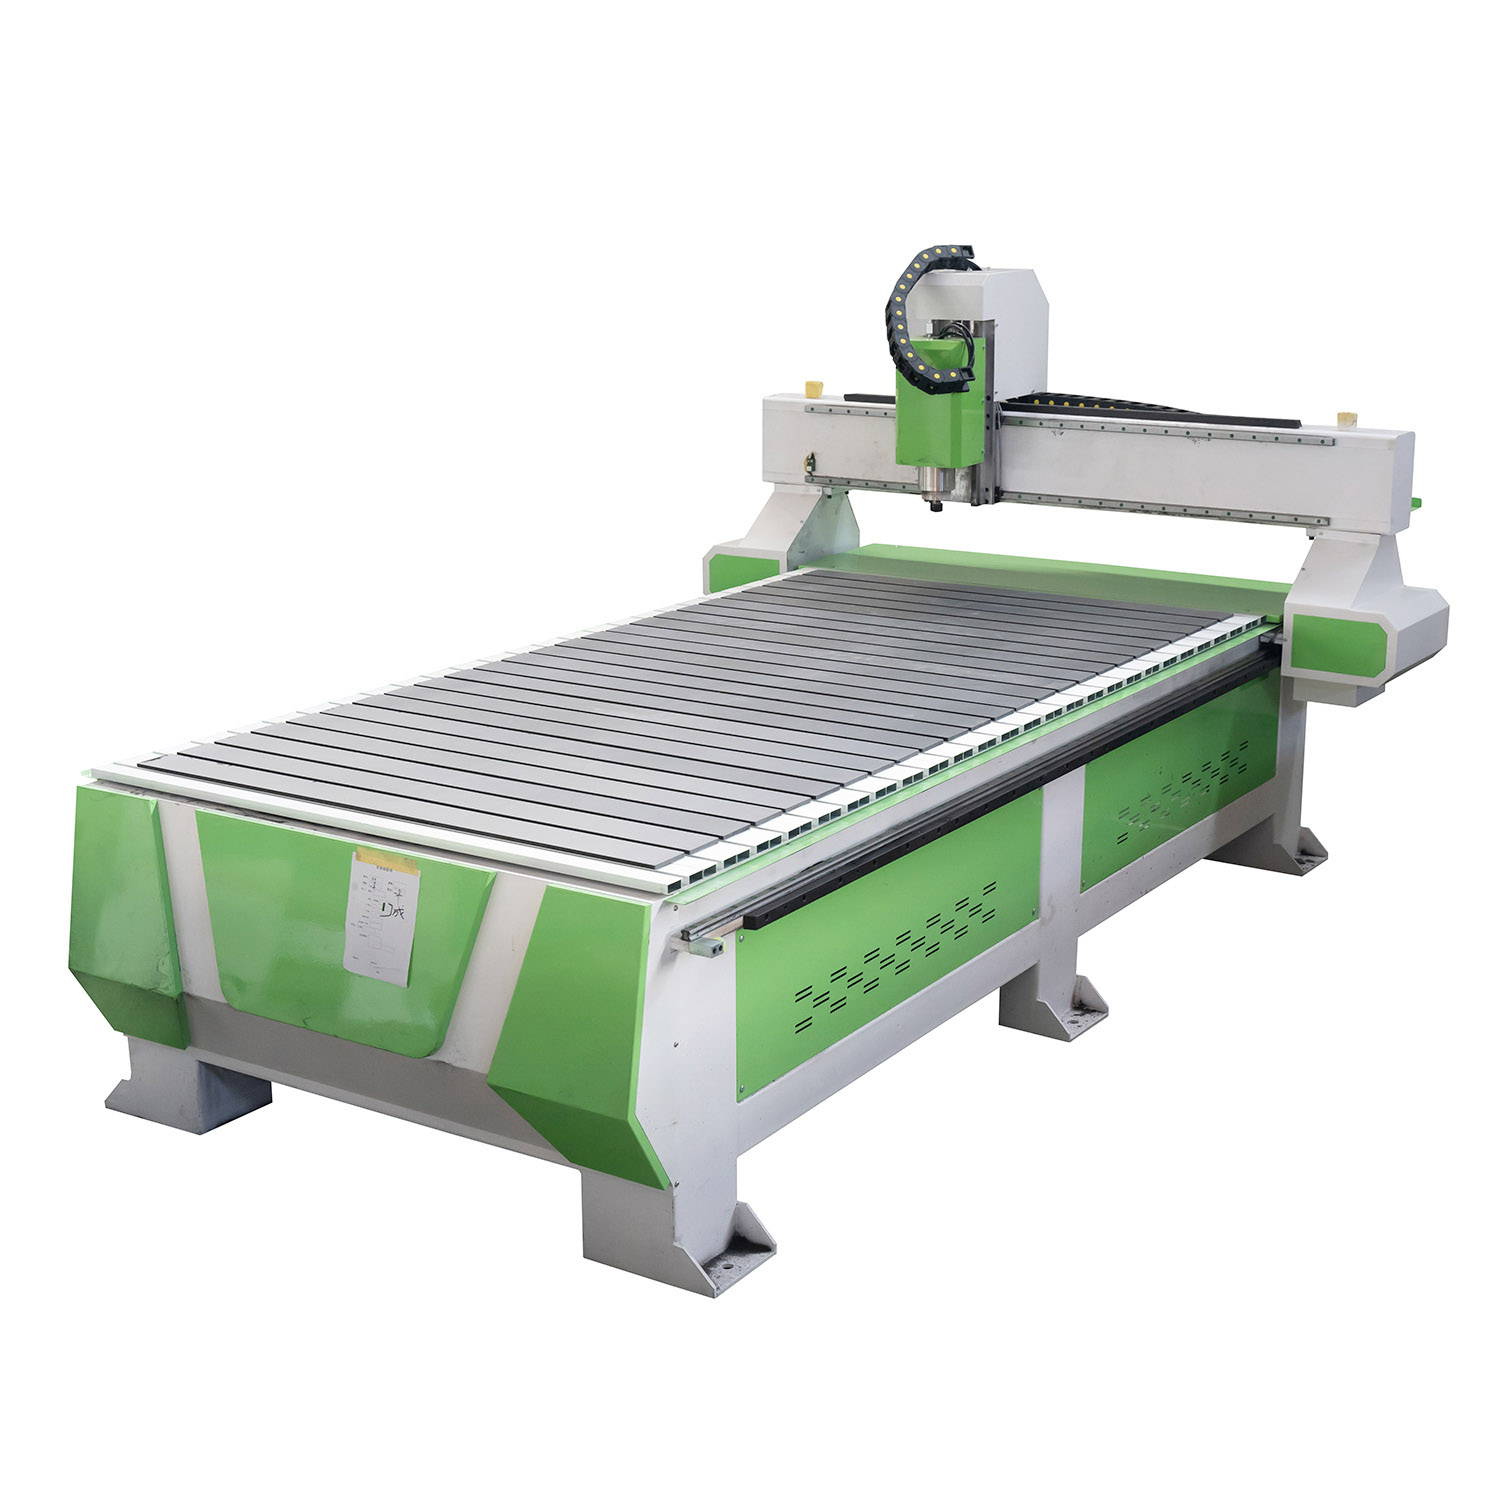 OEM/ODM Manufacturer Cnc Router Plastic Cutting - 3 Axis CNC Router Wood Carving Machine for MDF Kitchen Cabinet Furniture – Apex